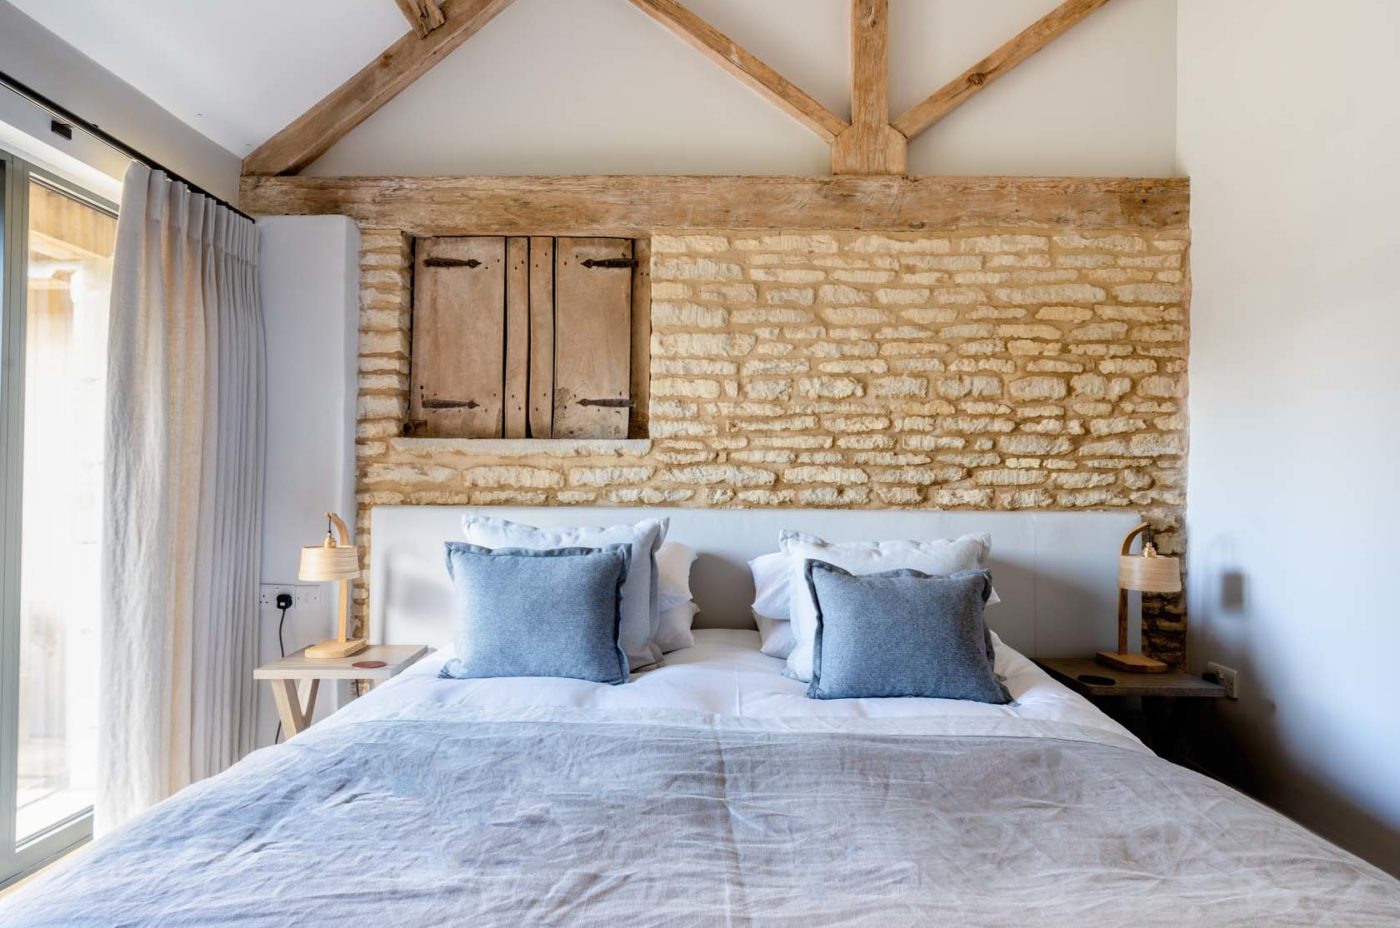 Large double bedroom with exposed brick work and high ceilings with wooden beams